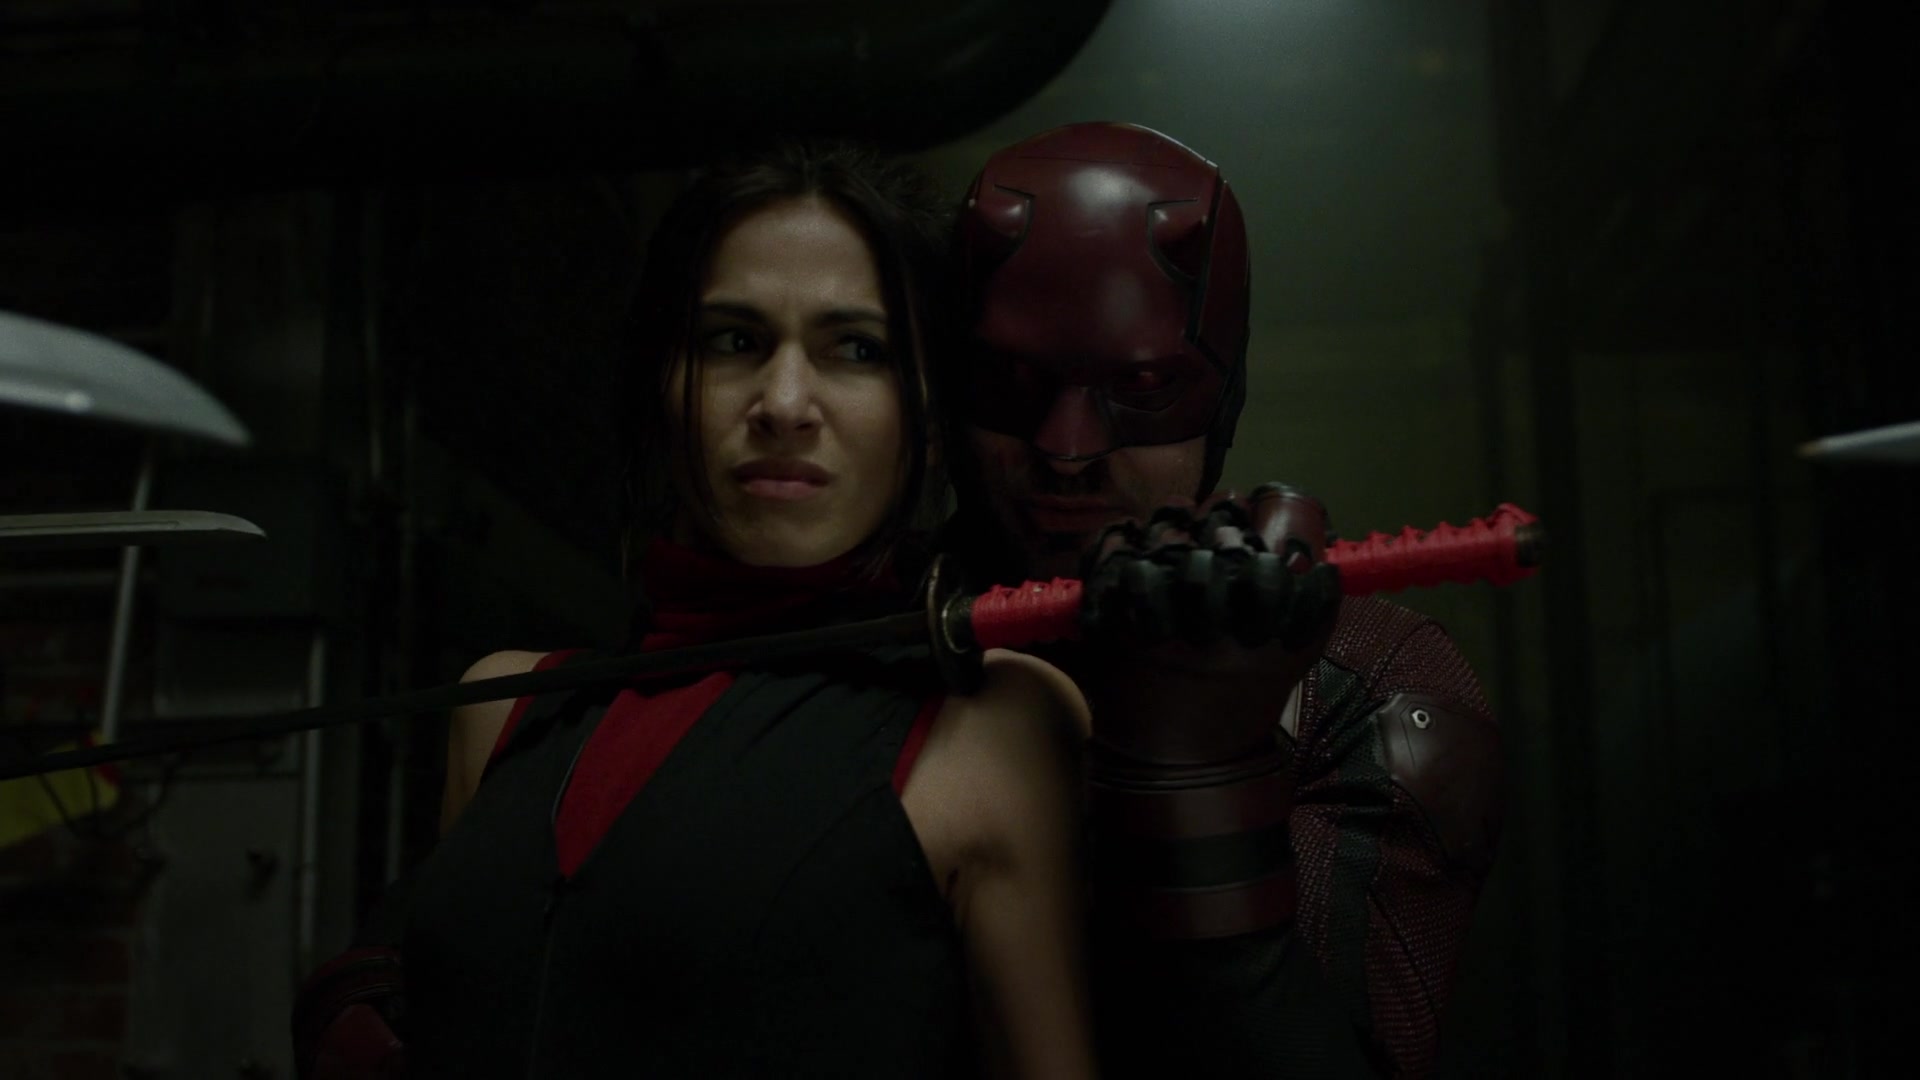 Daredevil (Charlie Cox) turns the tables on Elektra (Élodie Yung) in Daredevil Season 2 Episode 12 "The Dark at the End of the Tunnel" (2015), Marvel Entertainment